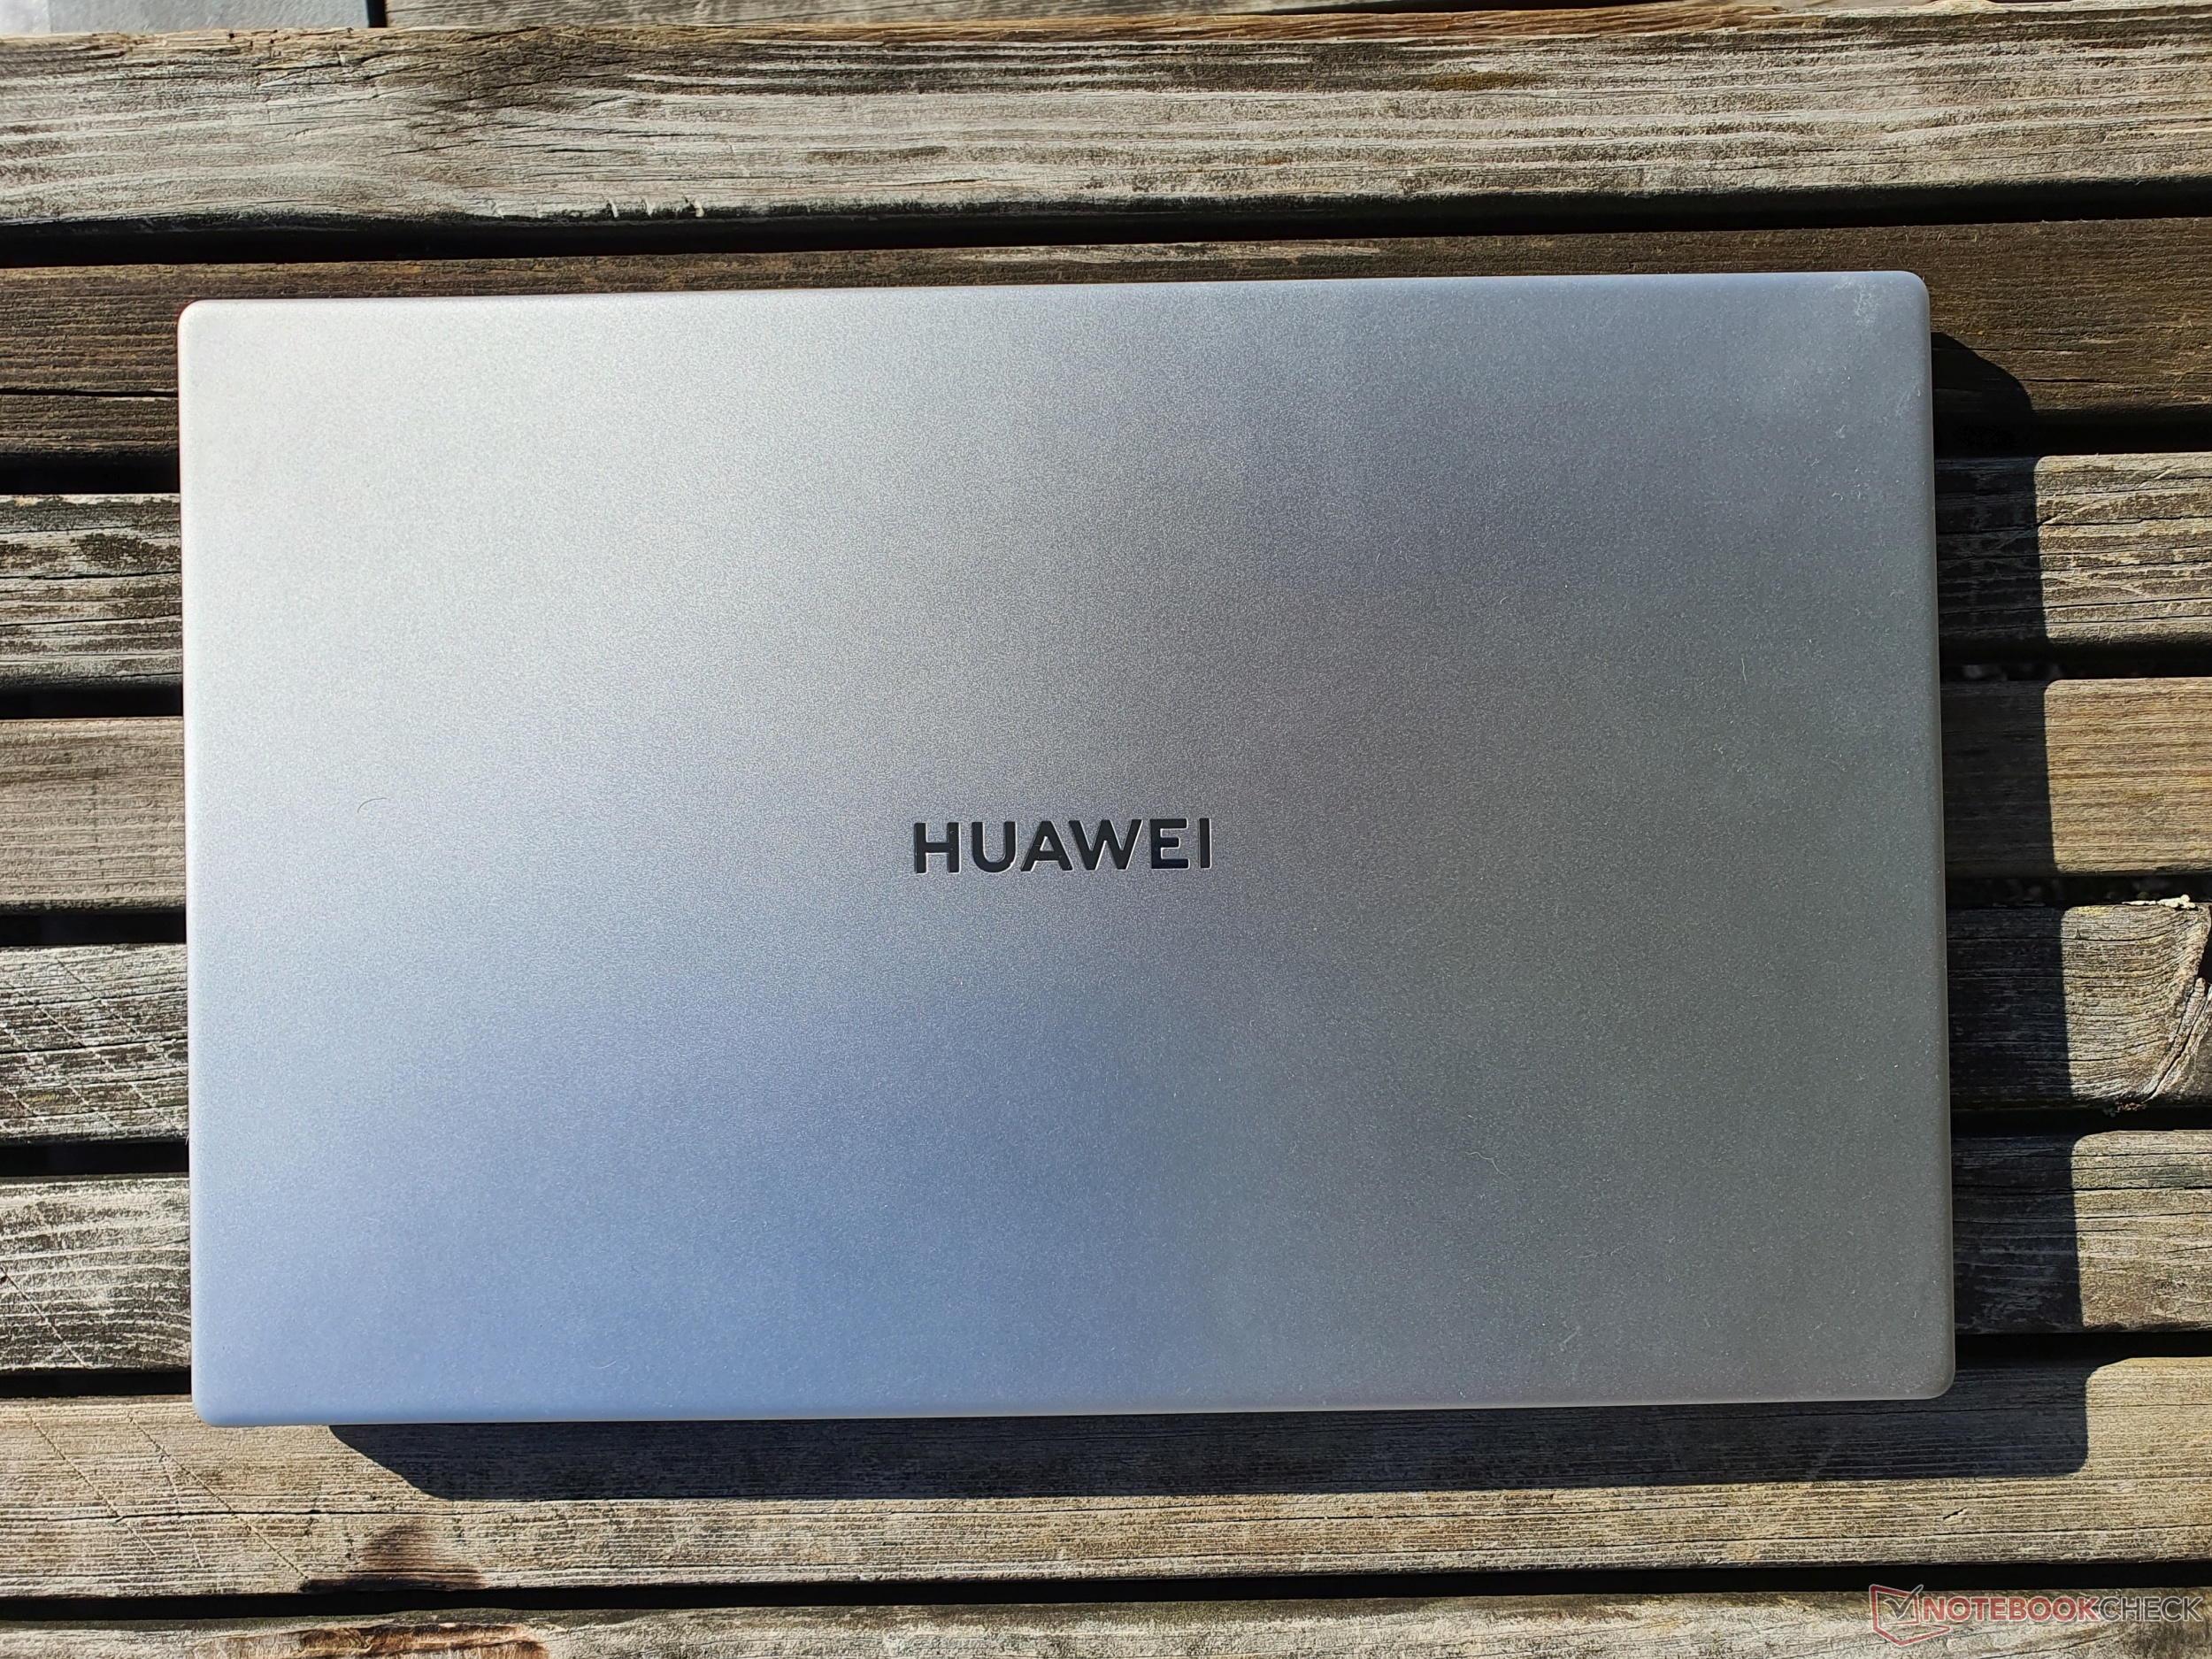 Huawei Matebook D15 Review: A Large And Light Laptop - The Reimaru Files